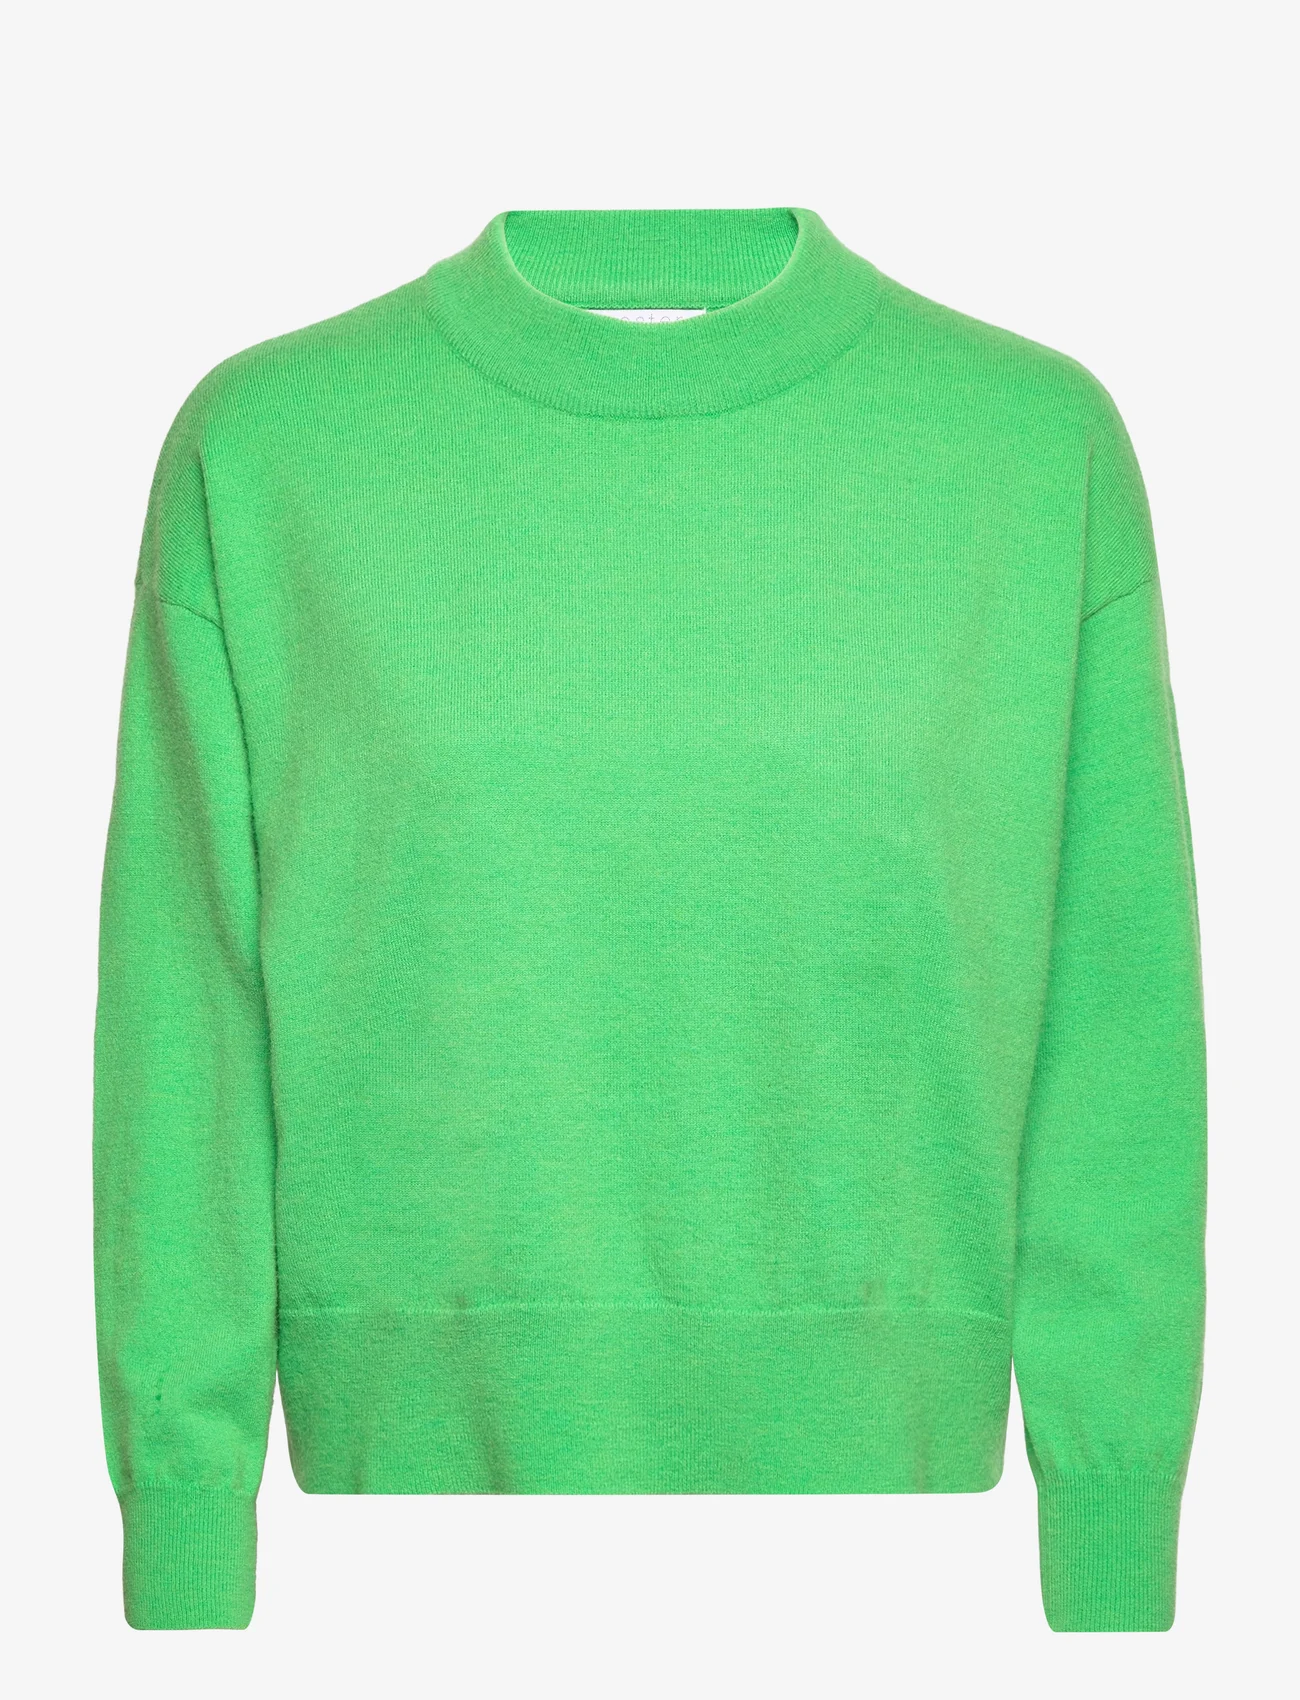 Coster Copenhagen - Knit with round neck - pullover - forest green - 0